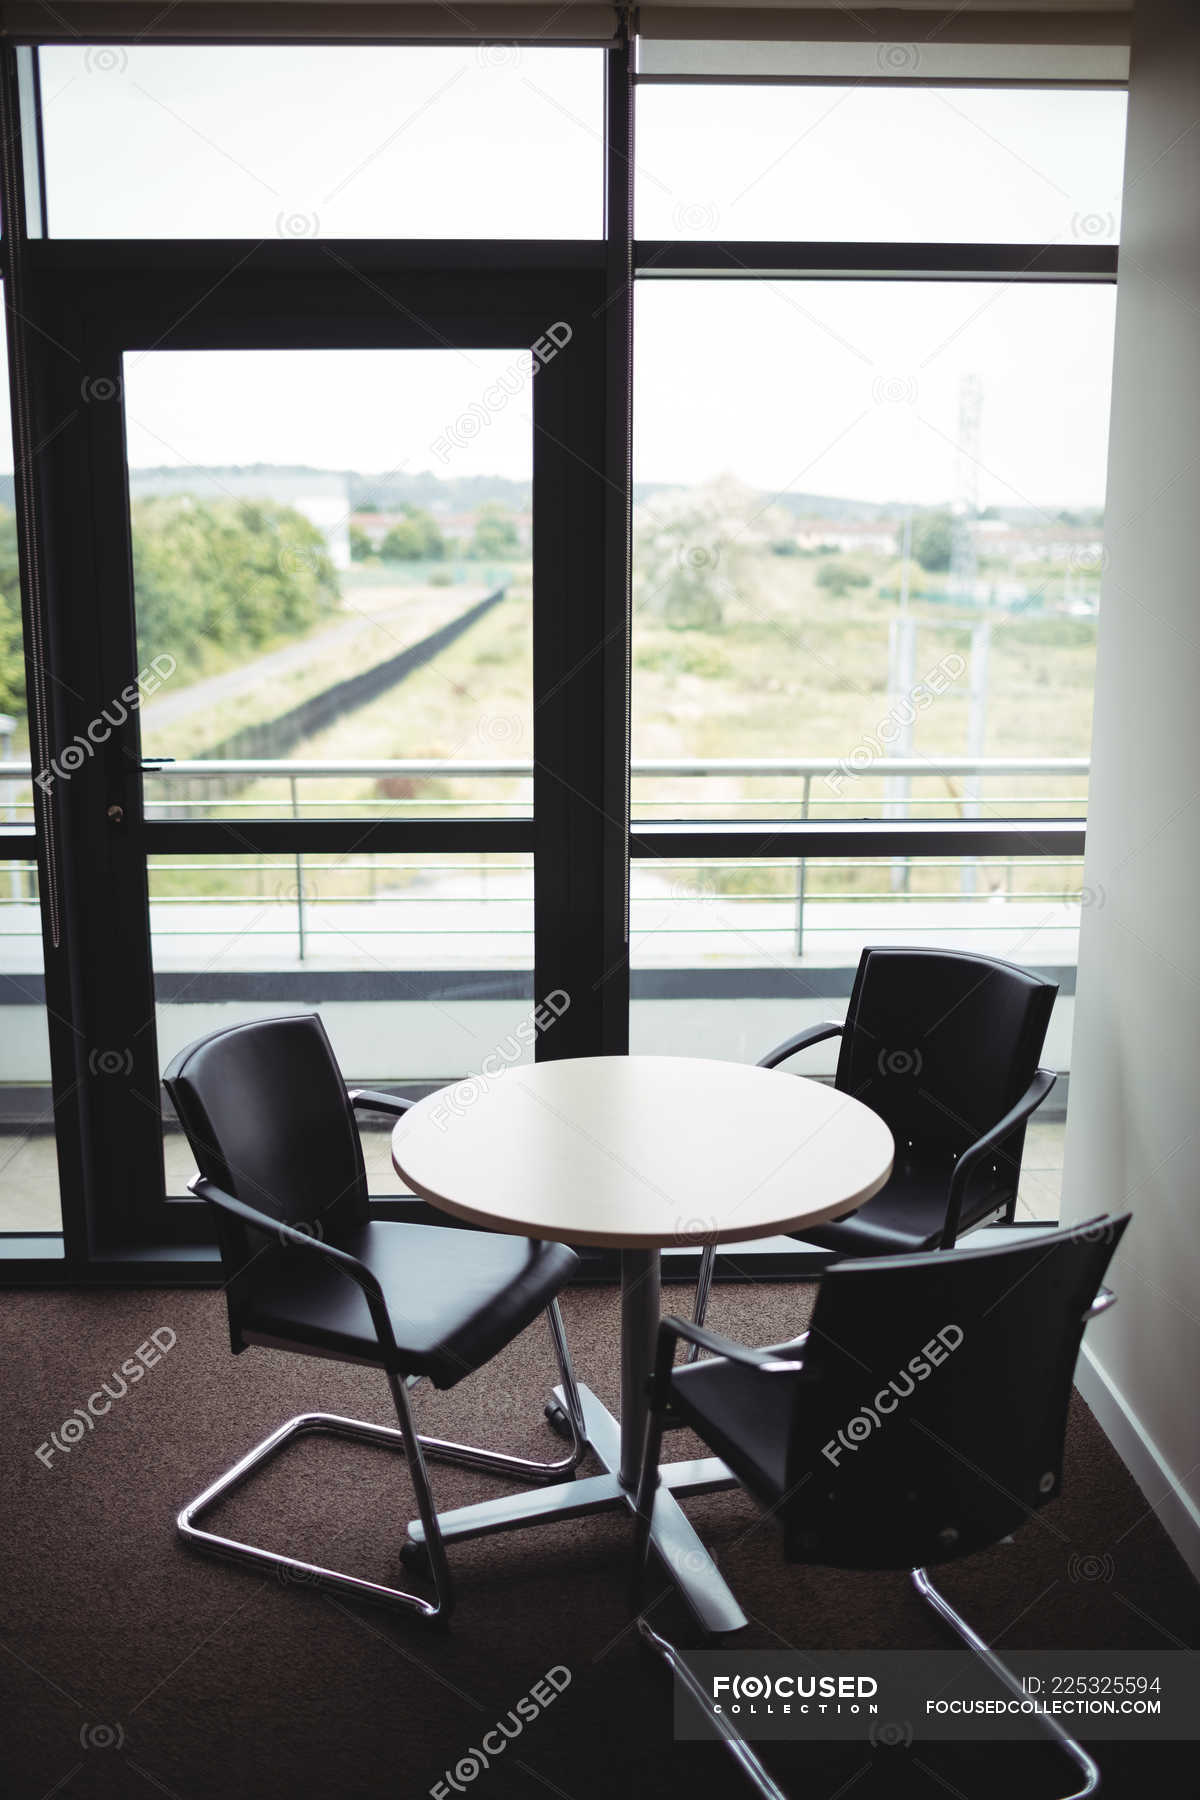 Empty Round Table And Chairs In Office, Office Round Table Chairs